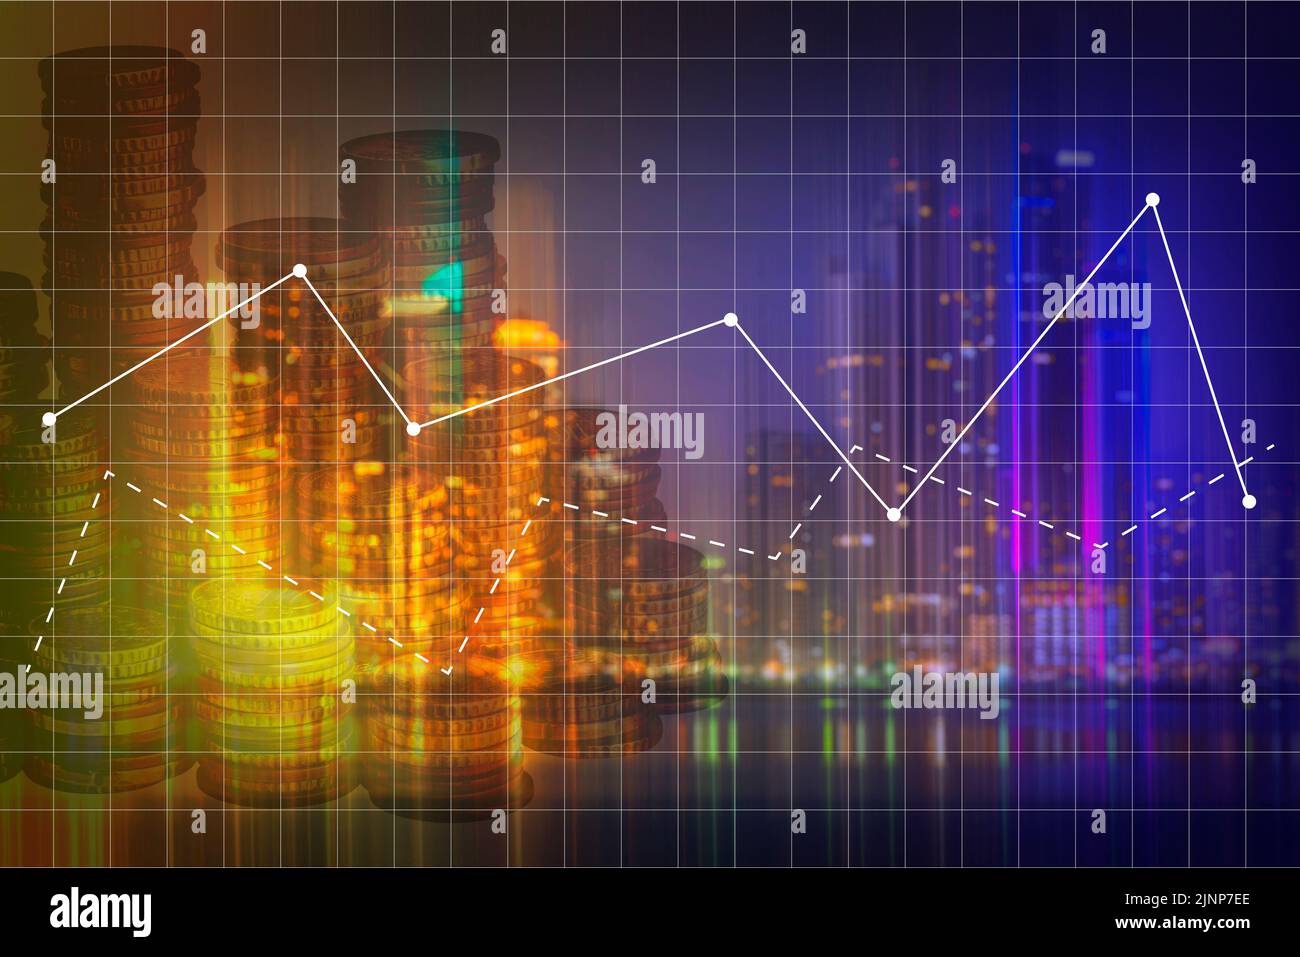 Stock charts on the background of skyscrapers. Financial system concept - stock photo Stock Photo